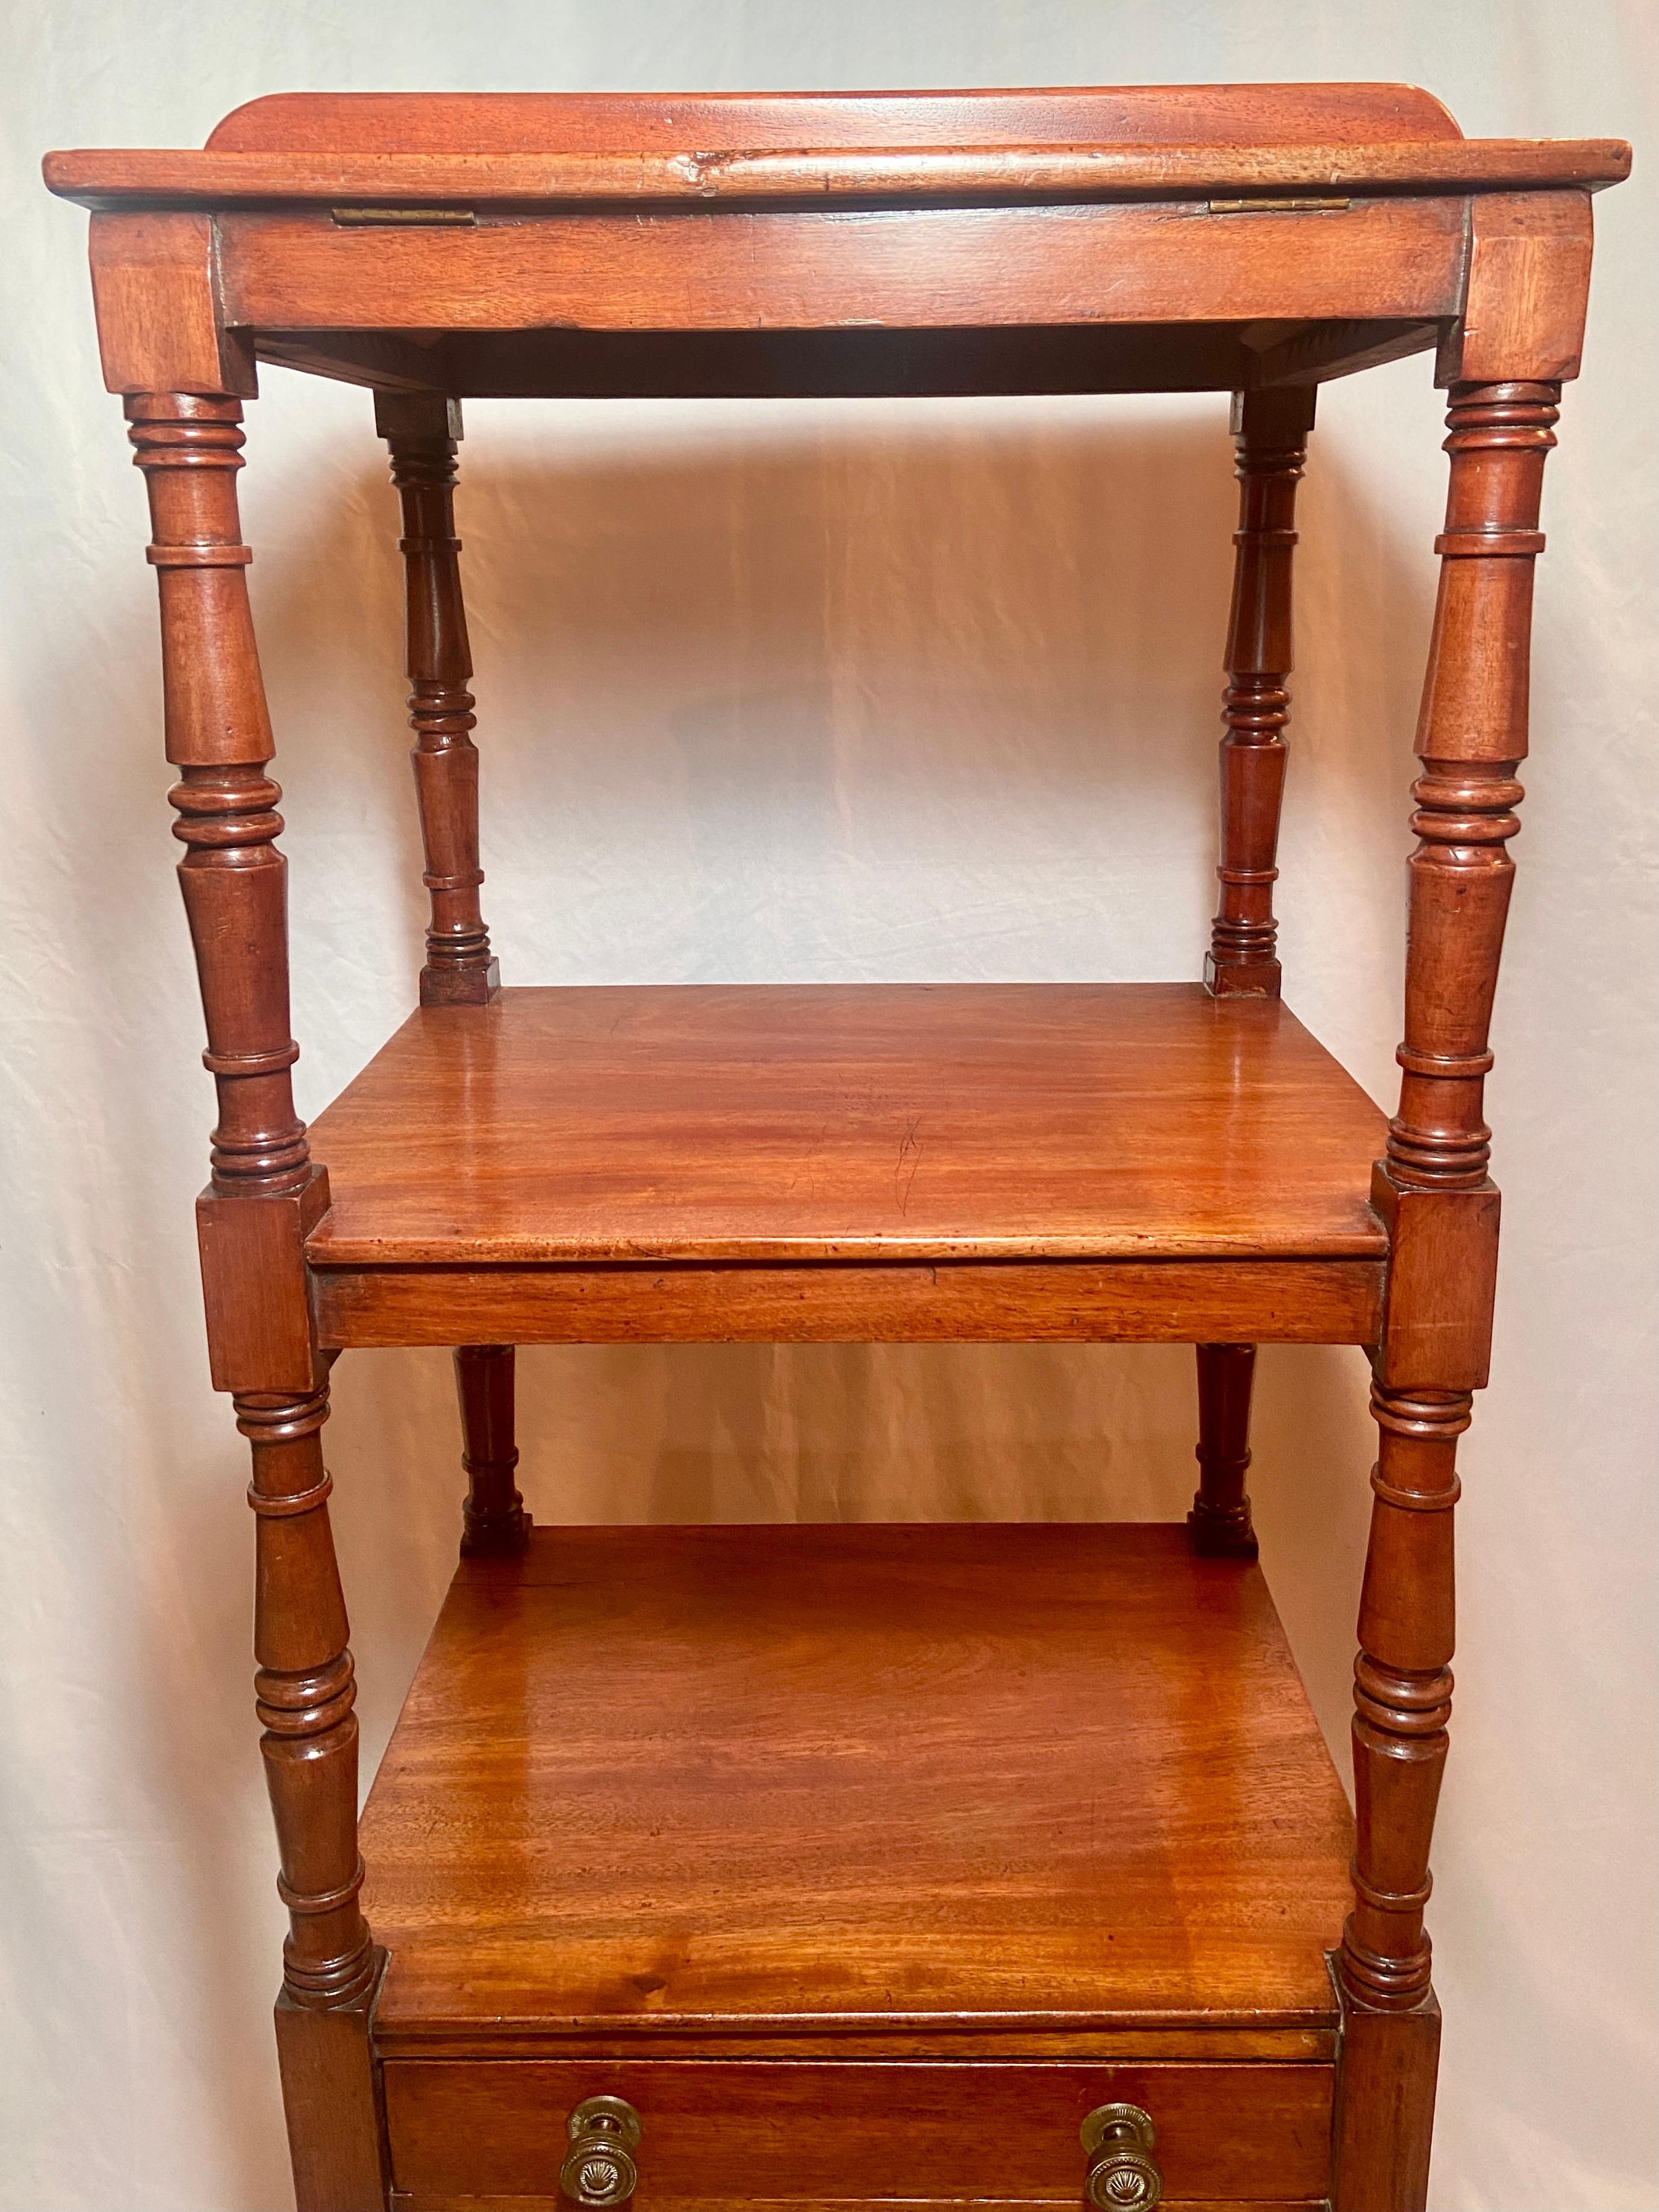 Antique English Mahogany Etagere with Lectern, Circa 1840-1860 In Good Condition For Sale In New Orleans, LA